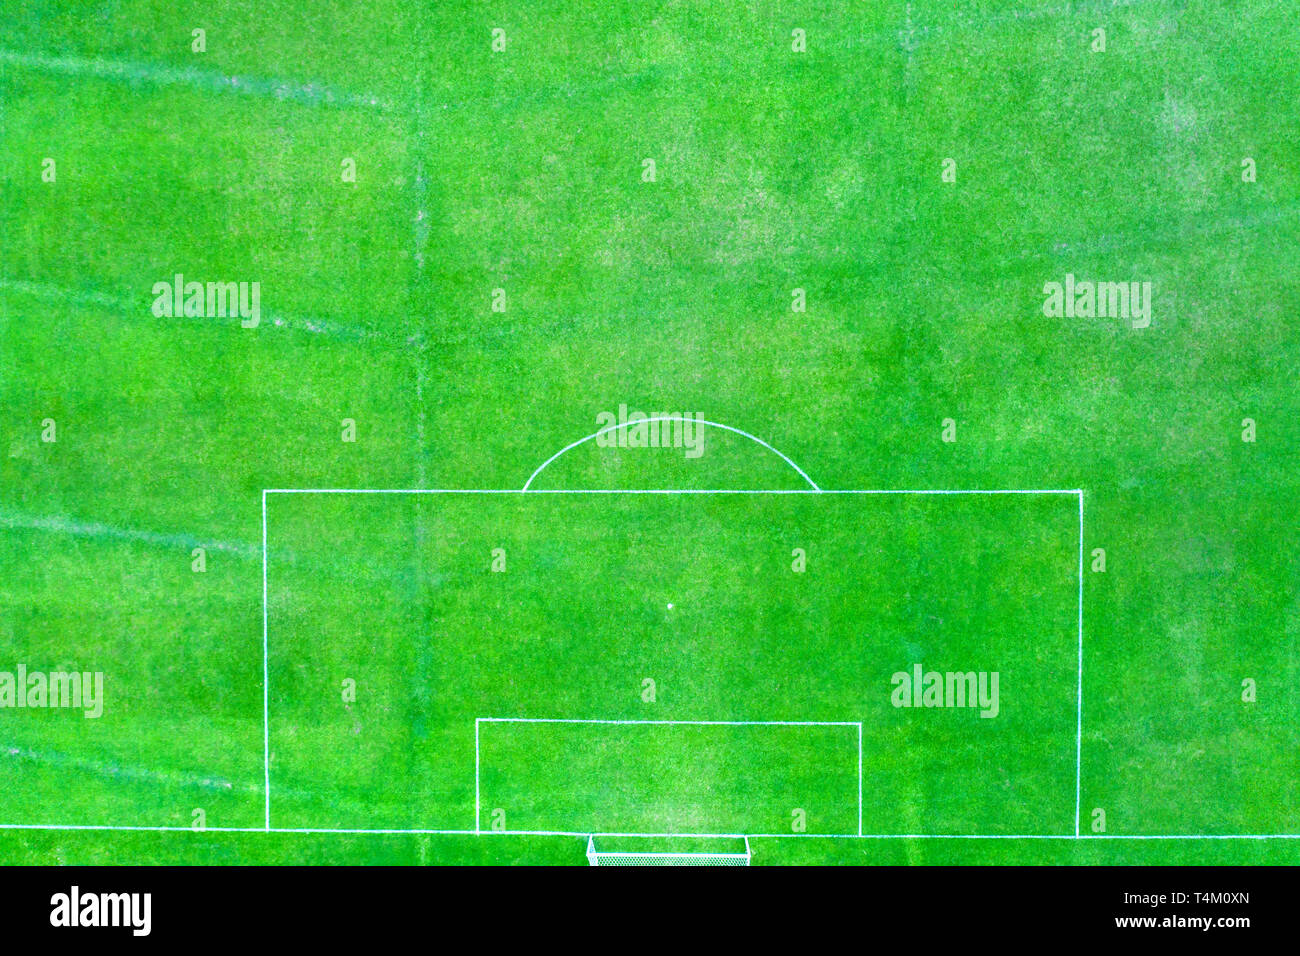 alternative perspective aerial view of a football pitch with penalty area and attached with real green grass. Stock Photo